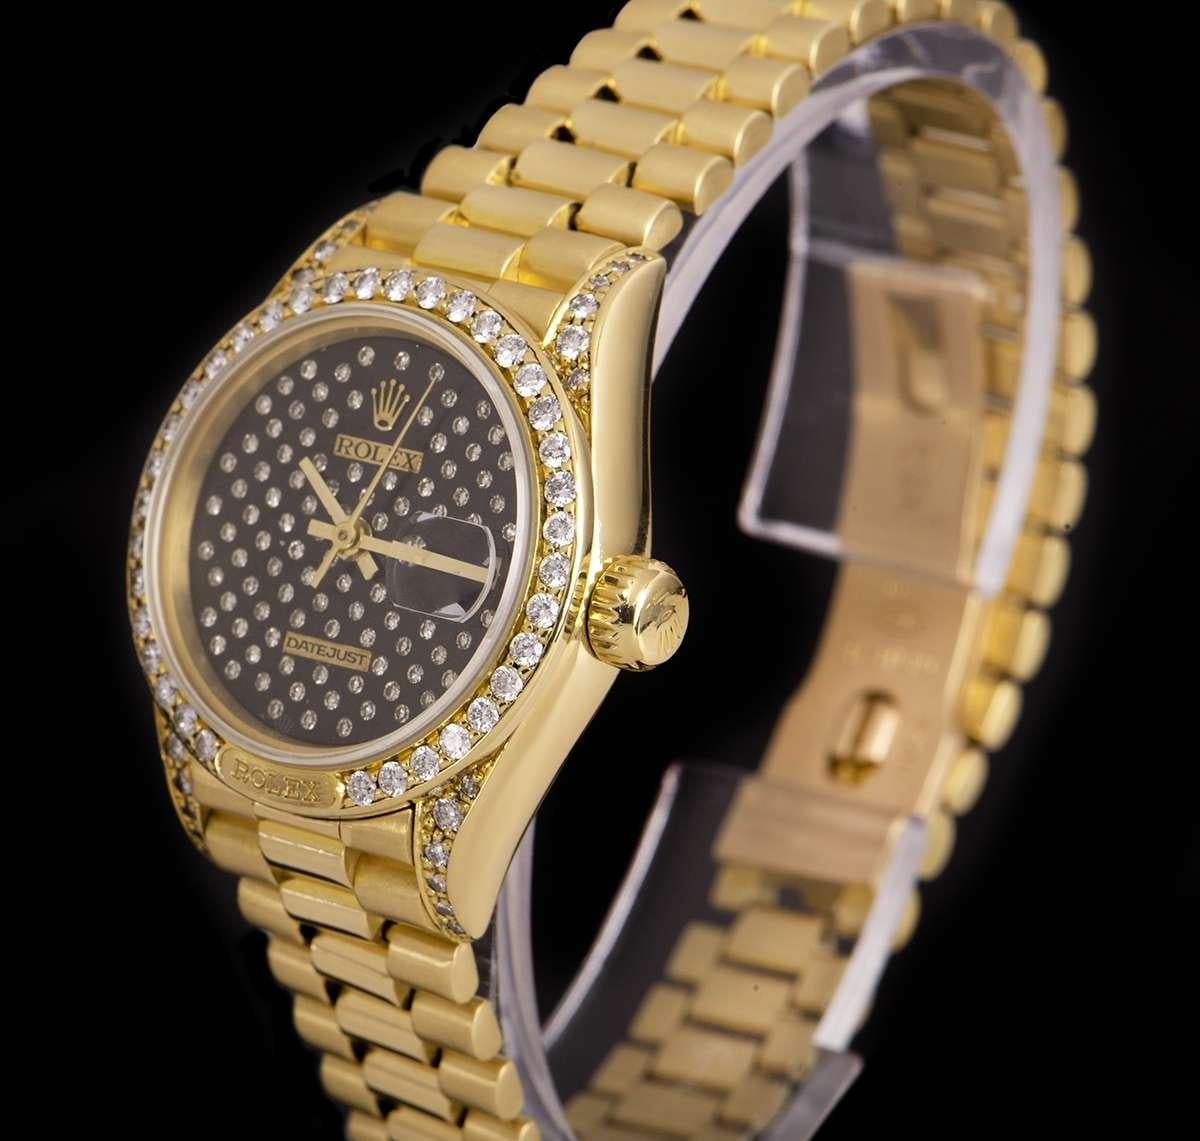 An 18k Yellow Gold Oyster Perpetual Datejust Ladies Wristwatch, rare pleiade diamond black dial set with approximately 98 applied round brilliant diamonds, date at 3 0'clock, a fixed 18k yellow gold bezel set with approximately 36 round brilliant